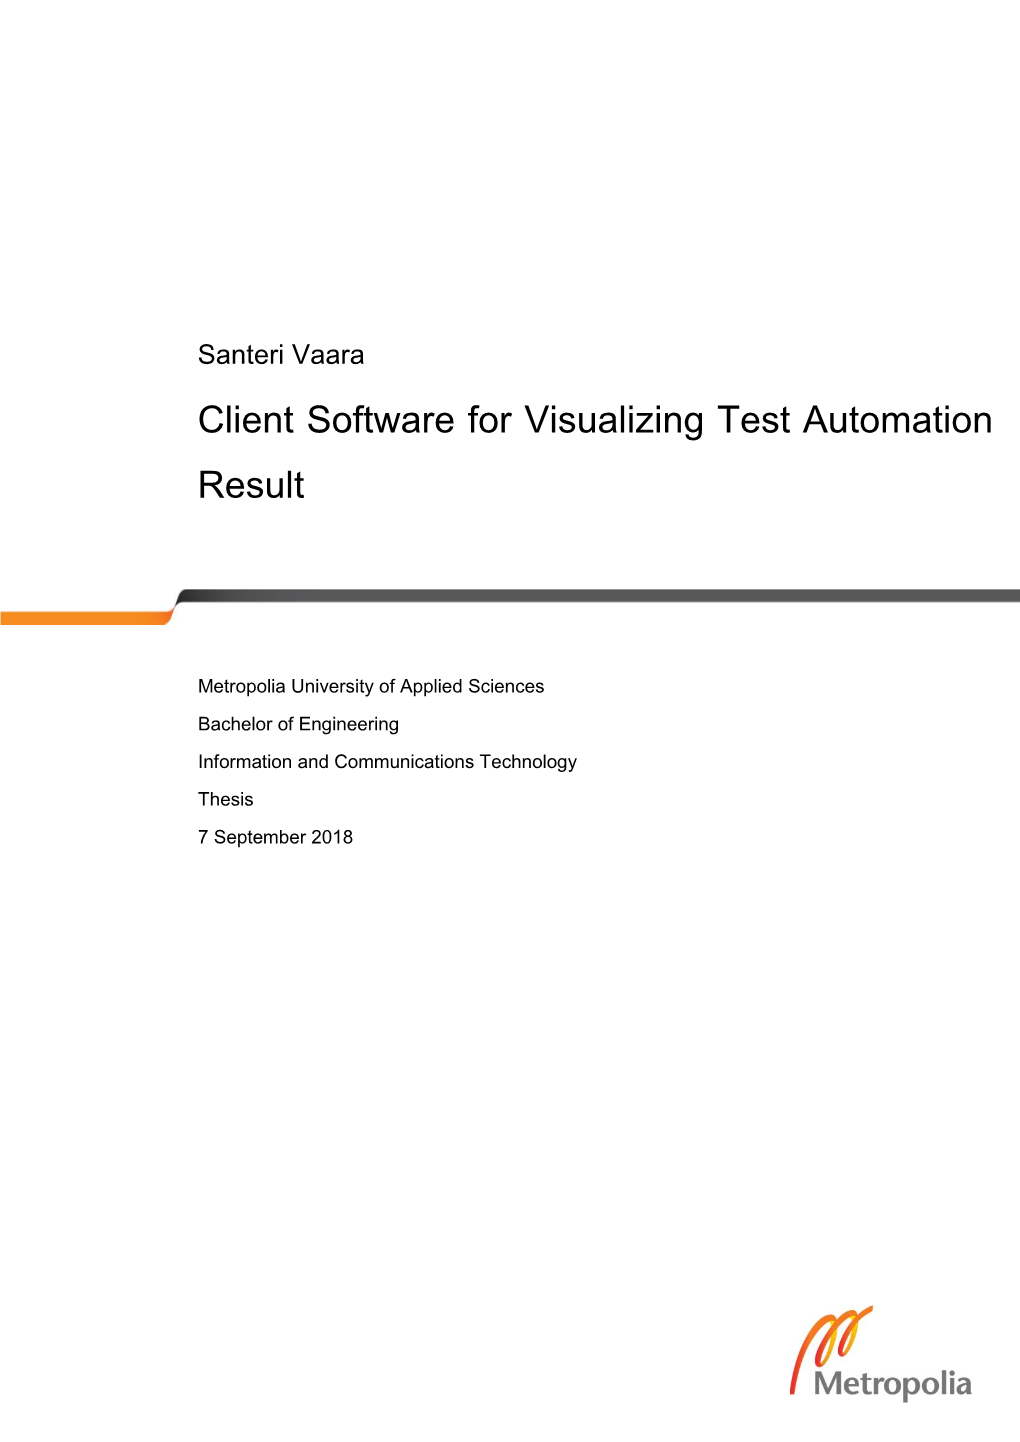 Client Software for Visualizing Test Automation Result